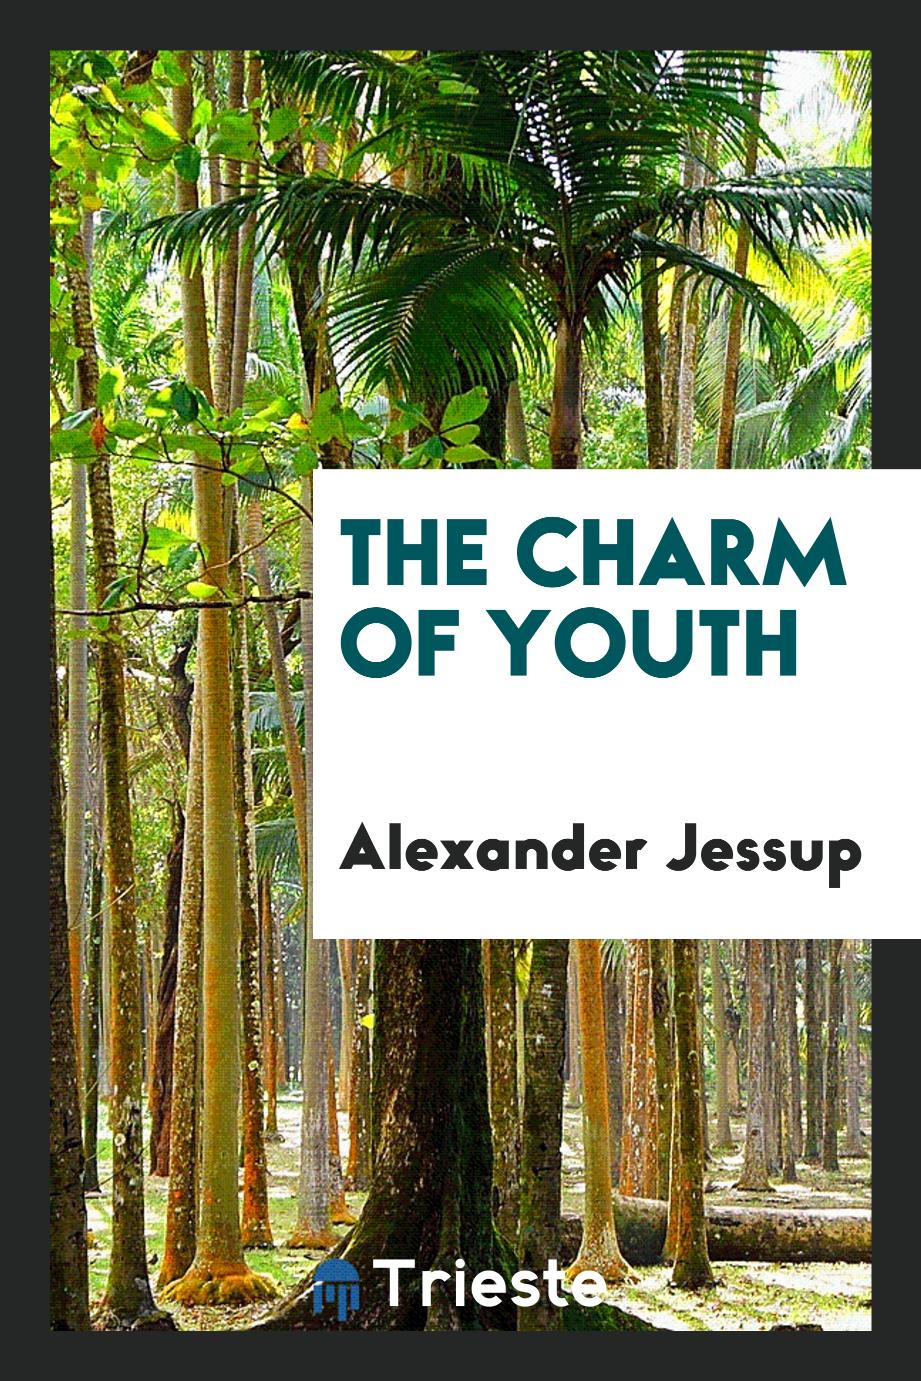 The Charm of Youth